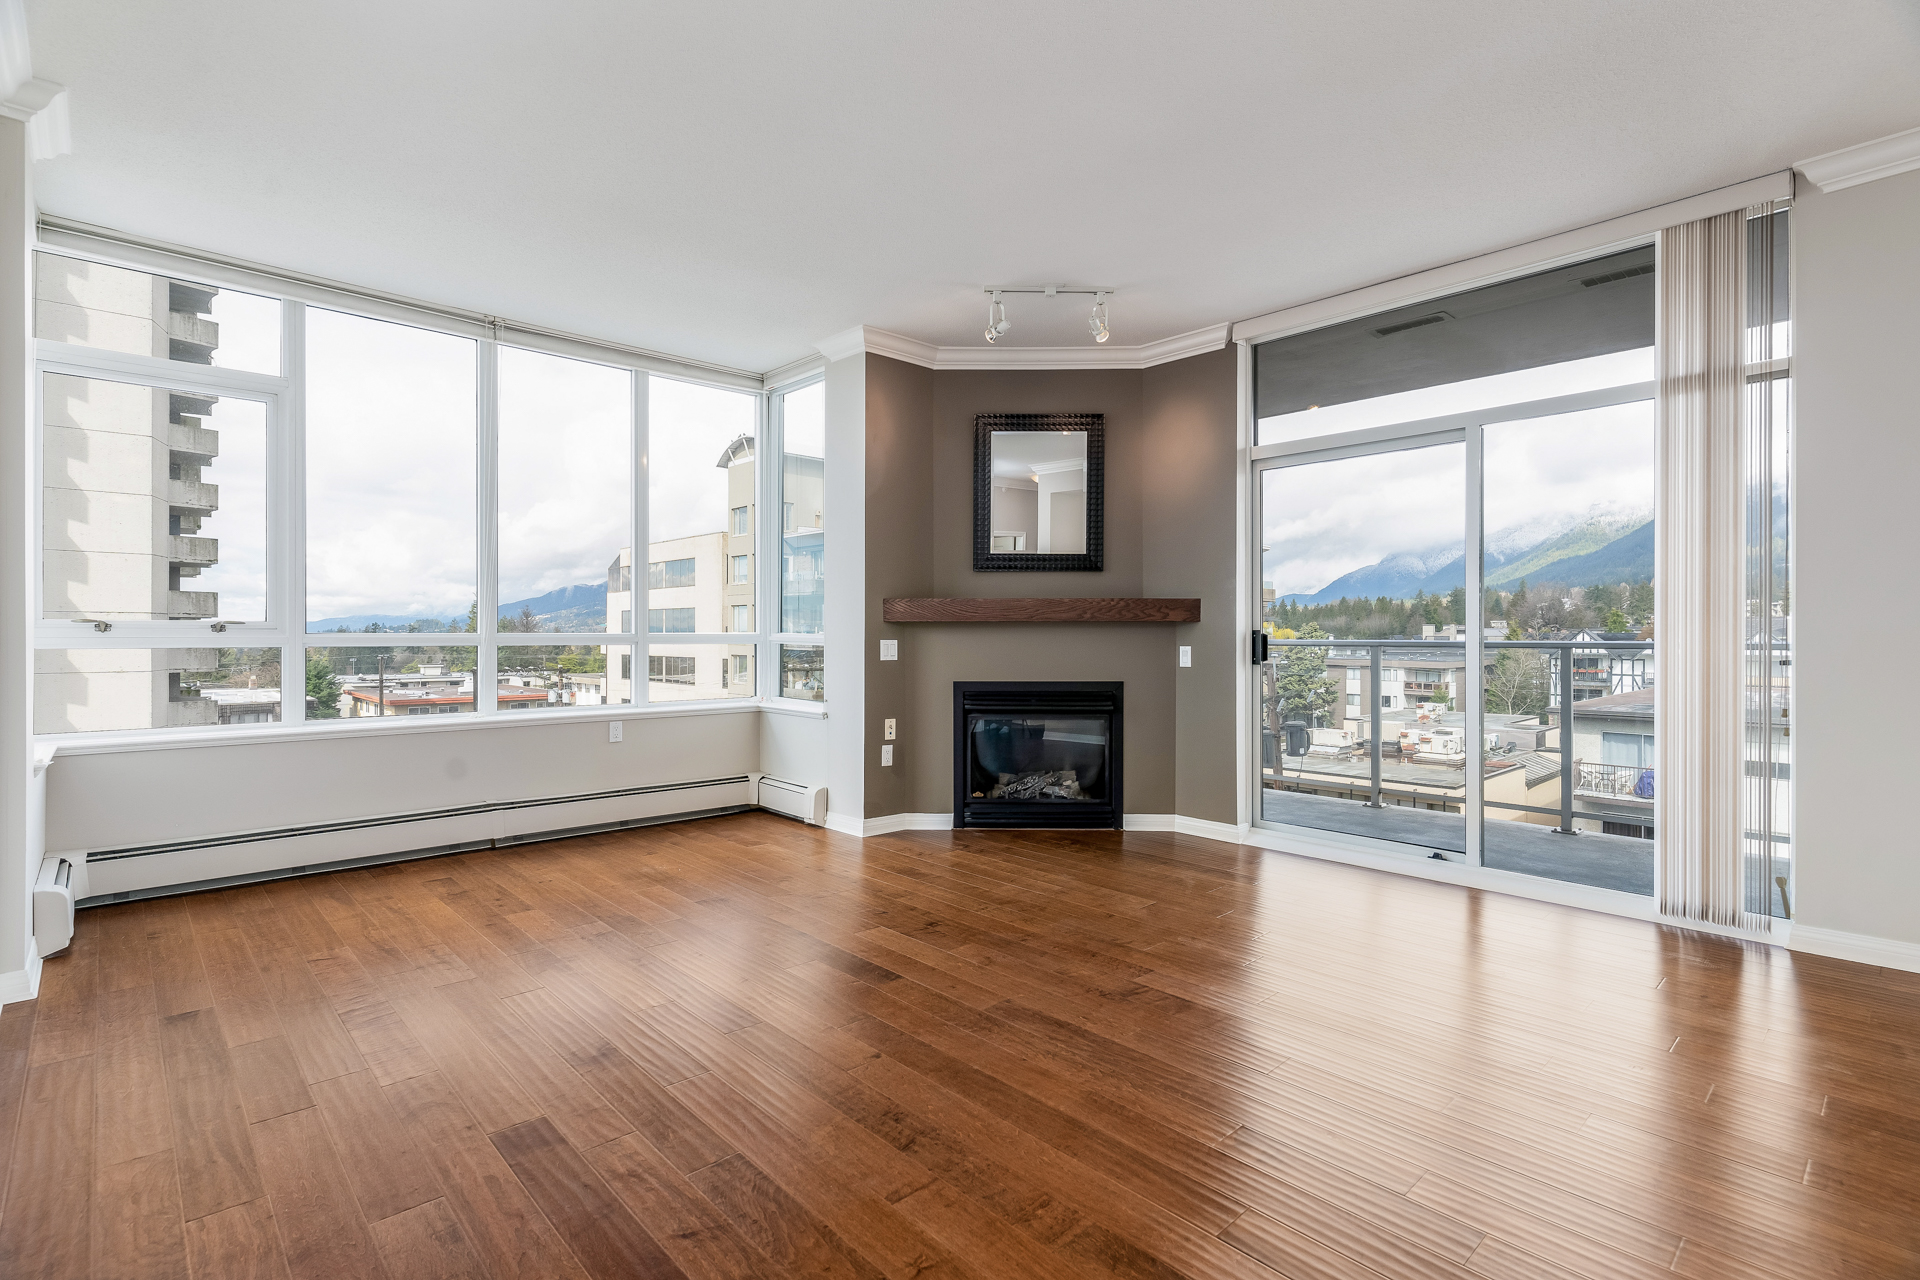 402 120 West 16th Street, North Vancouver - For Sale - Image 1